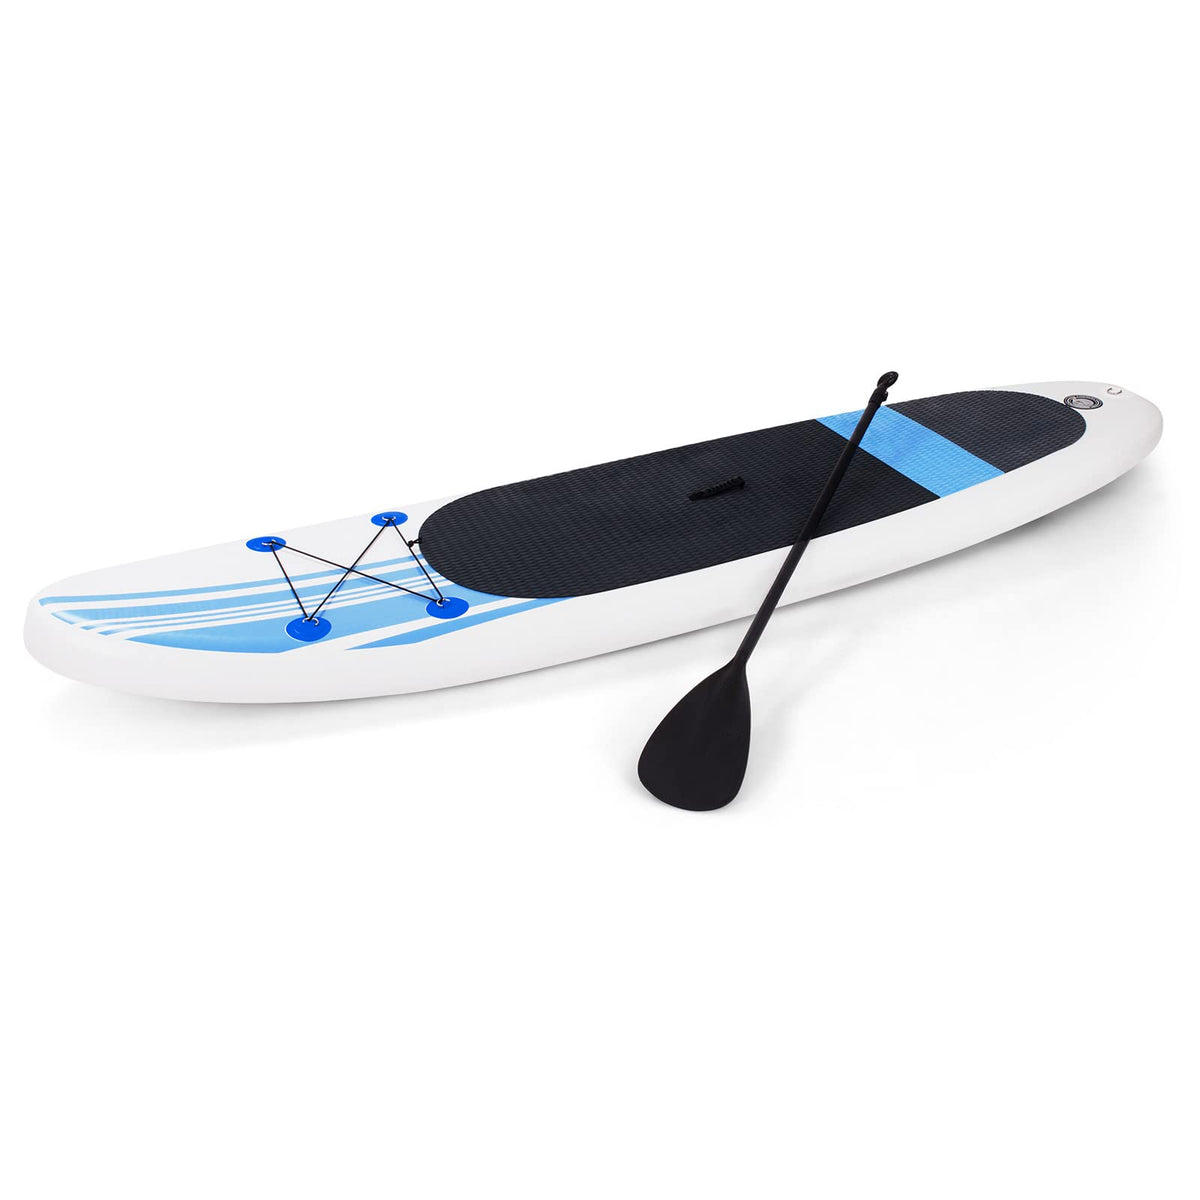 10ft Inflatable Stand up Paddle Board, Standing SUP Paddle Board, w/Adjustable Paddle, ISUP Accessories, 10' x 30" x 6", Blue